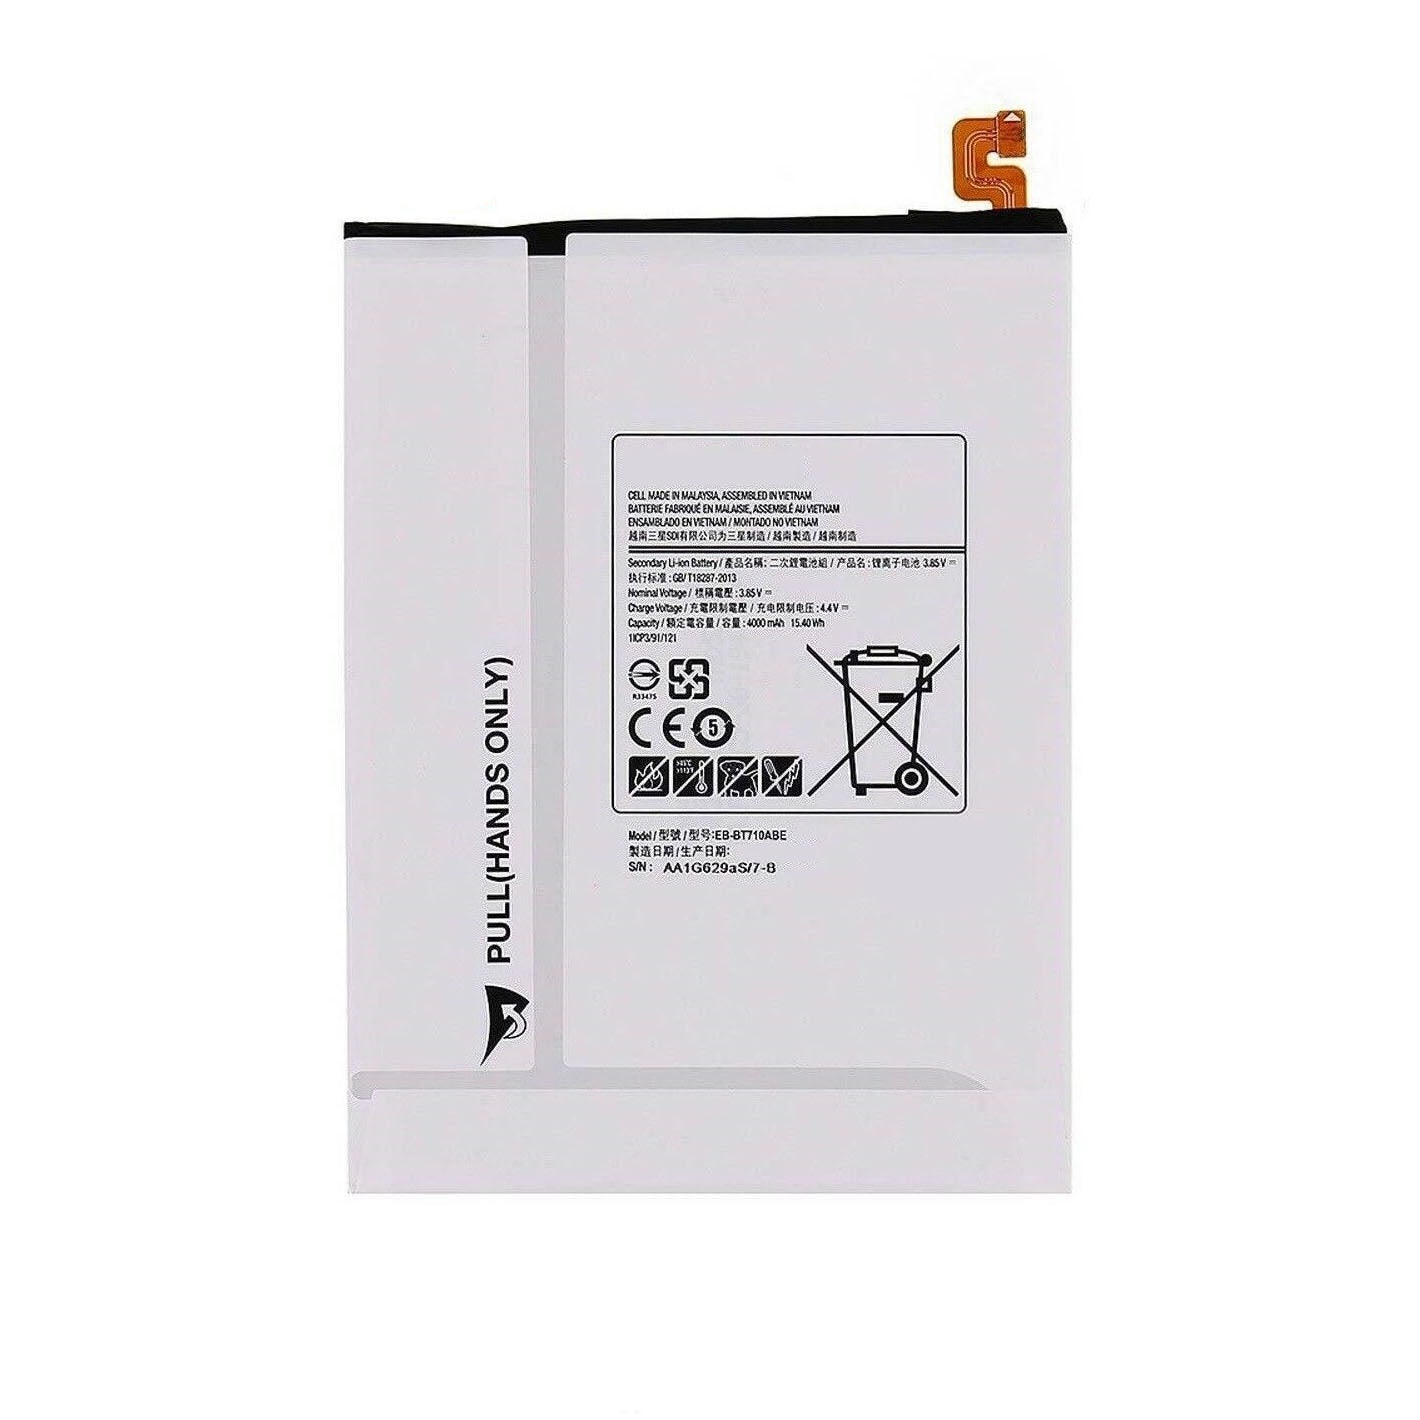 Replacement Battery For Samsung Galaxy Tab S2 8.0" - EB-BT710ABA